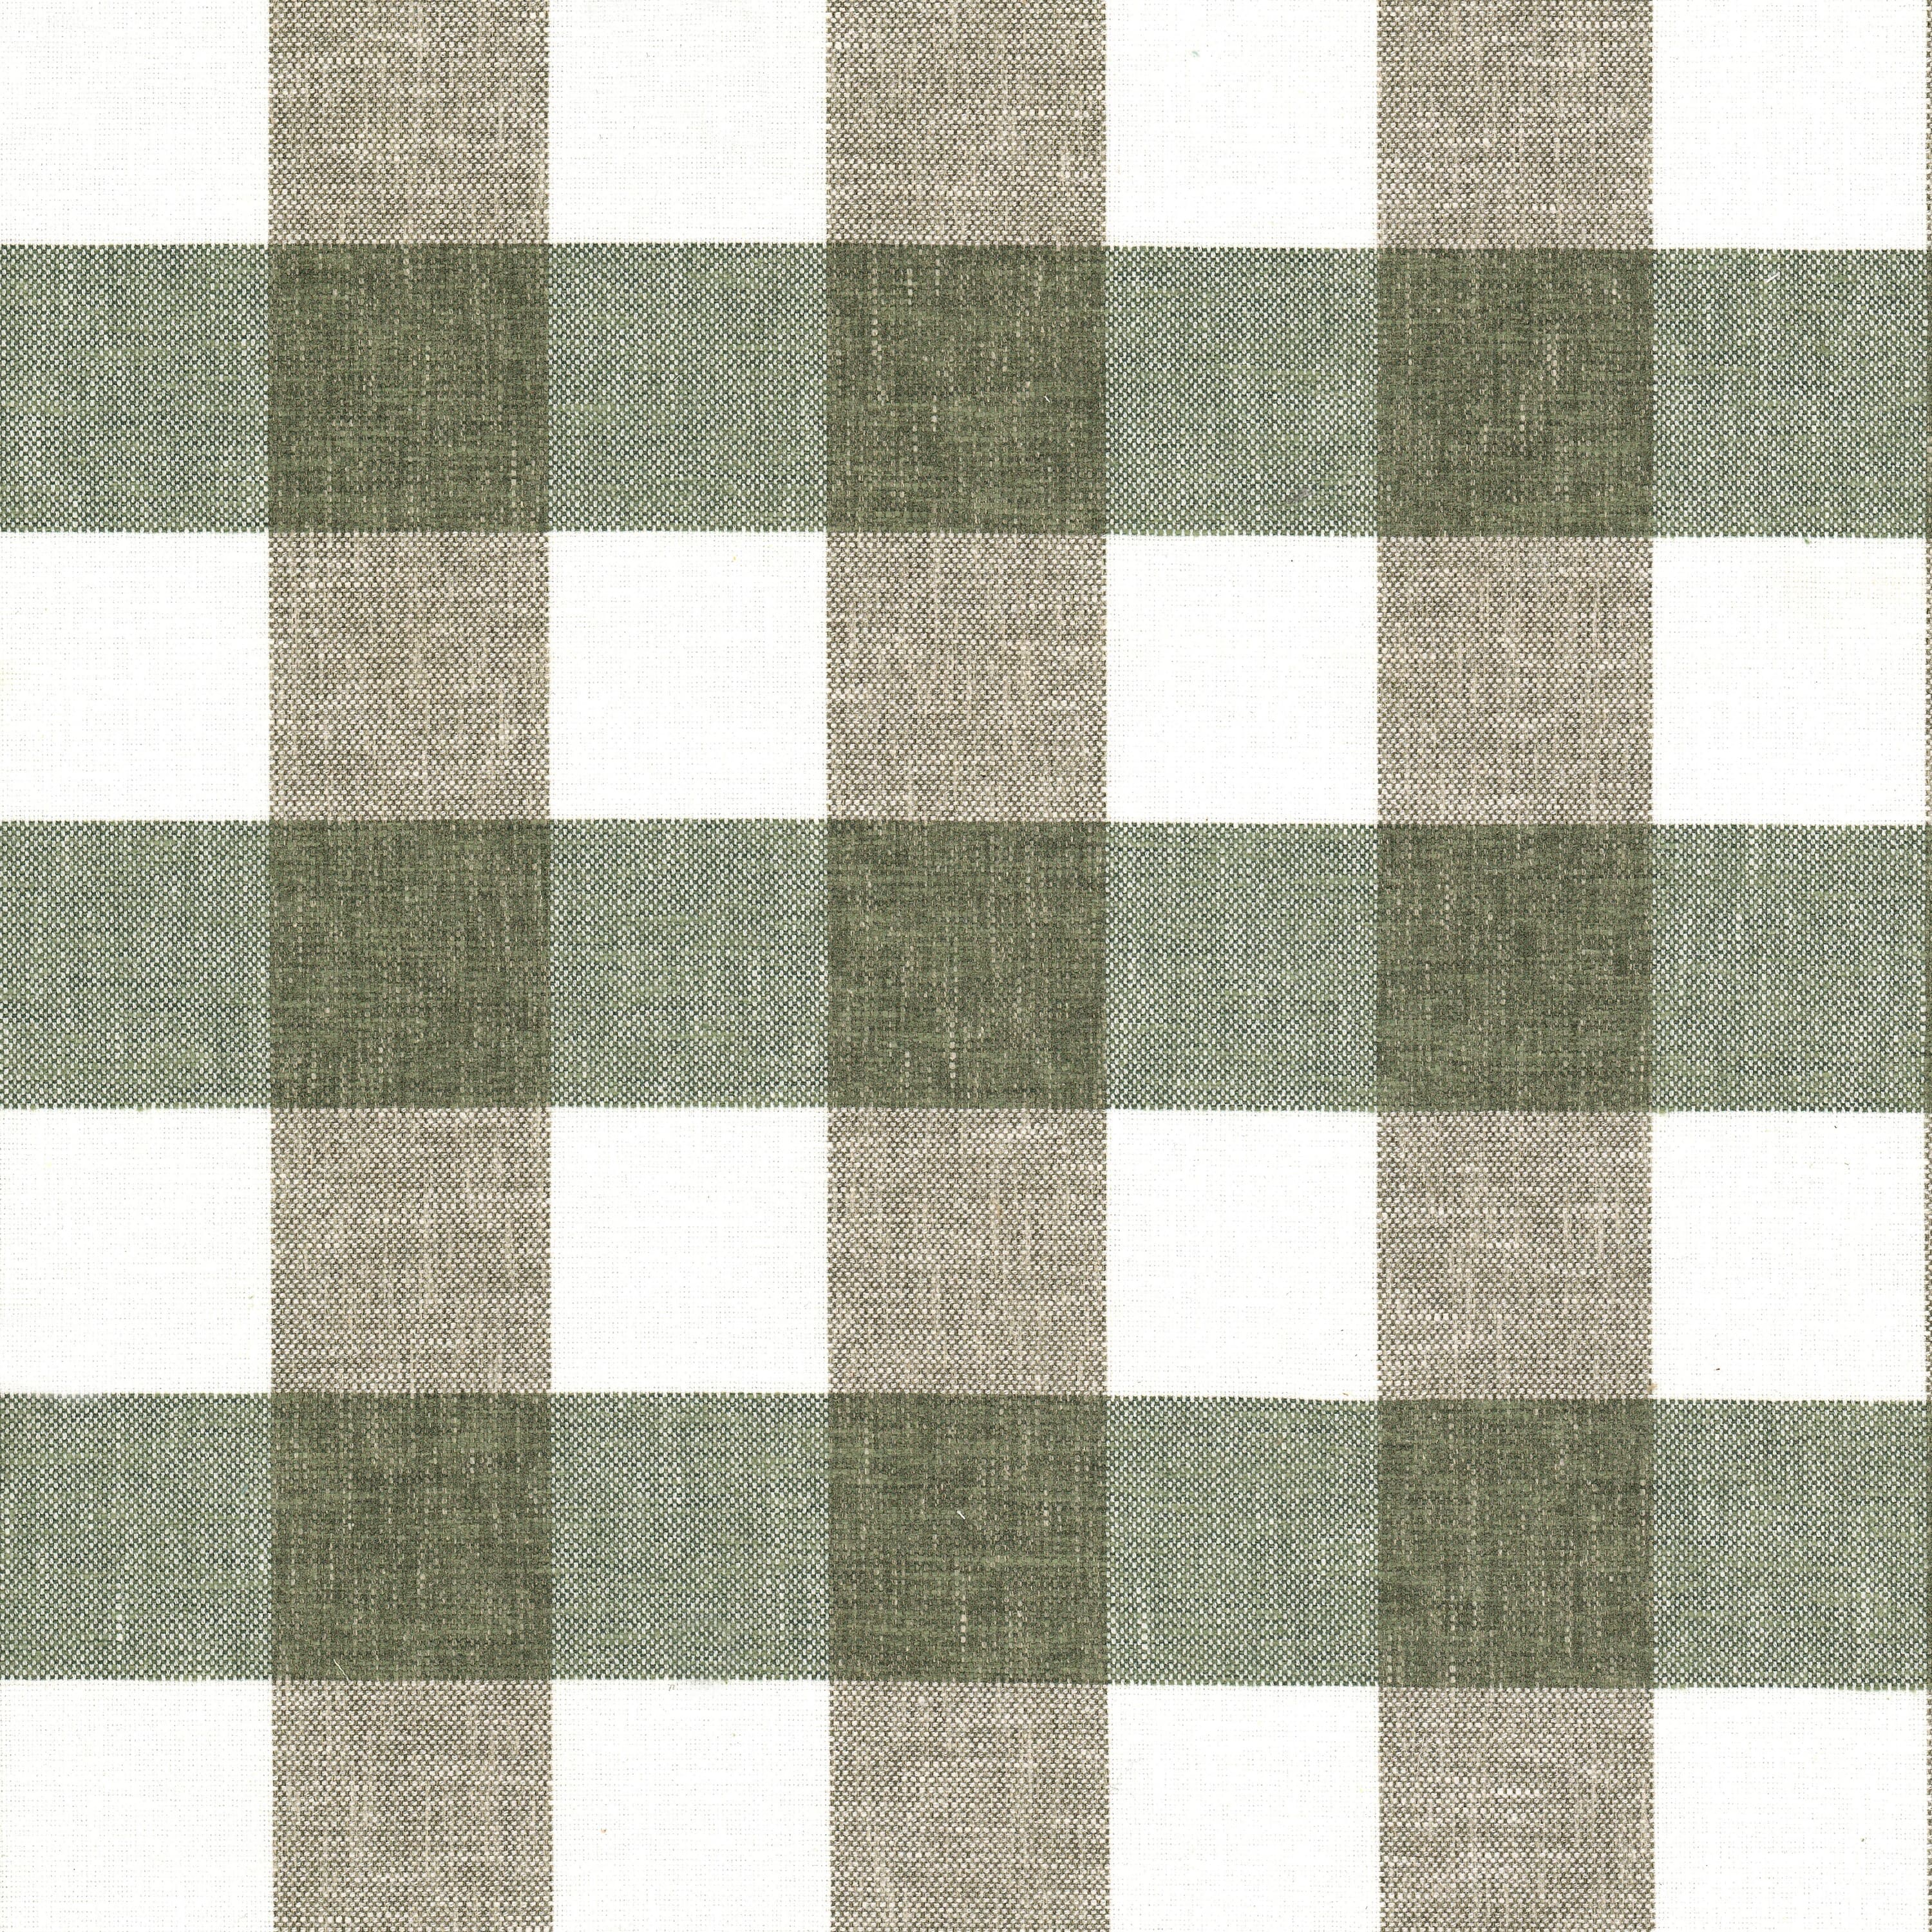 Vary 1 Basil by Stout Fabric